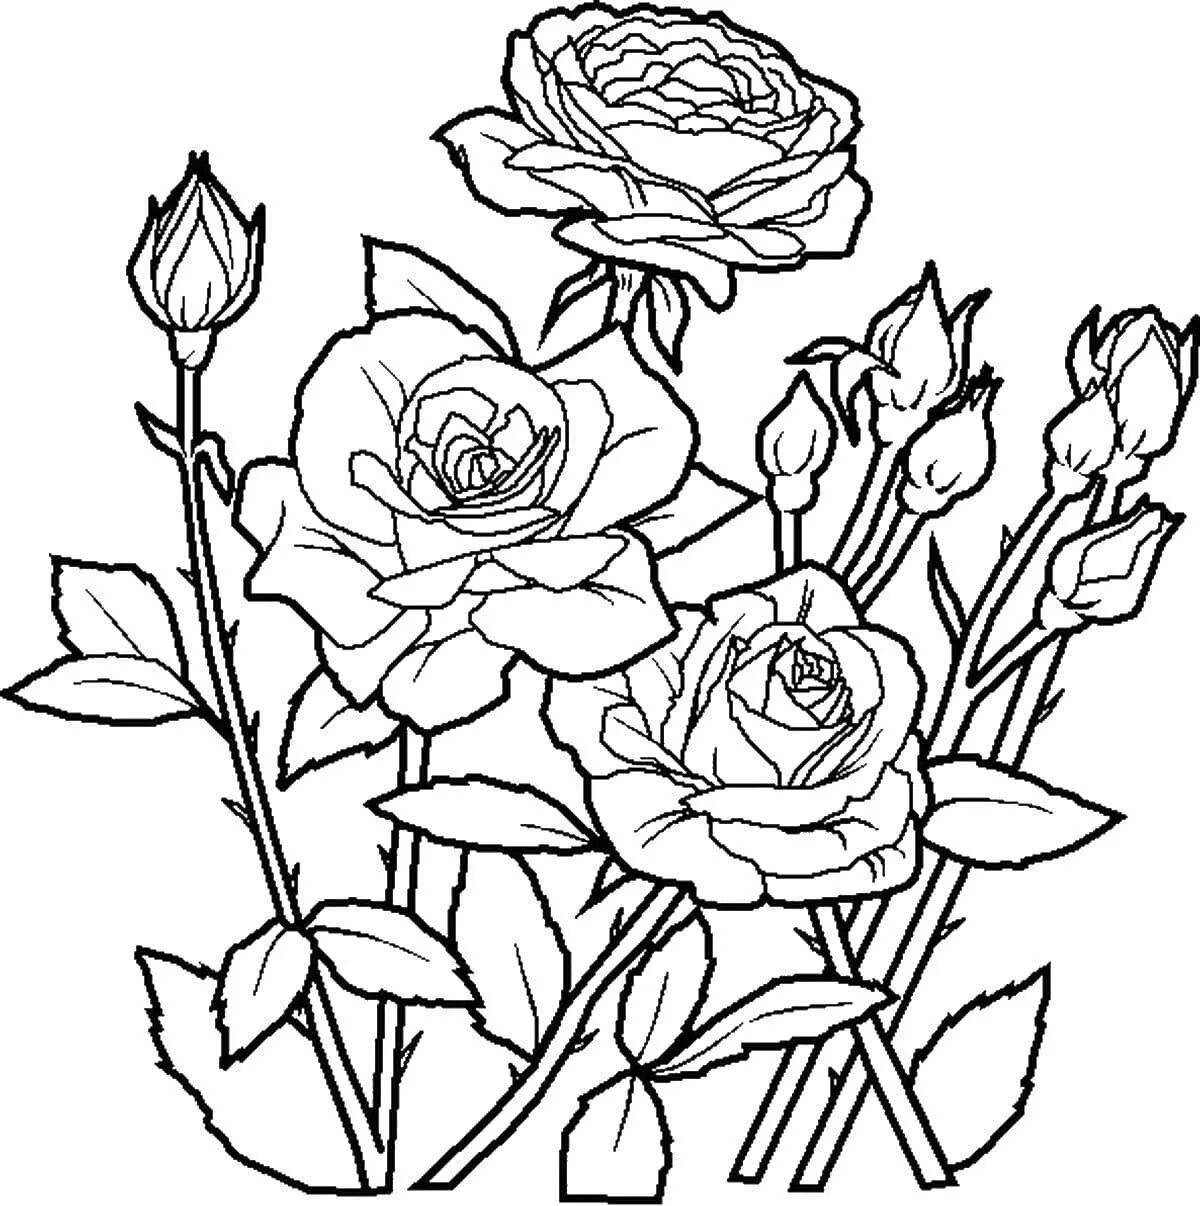 Shining roses for coloring